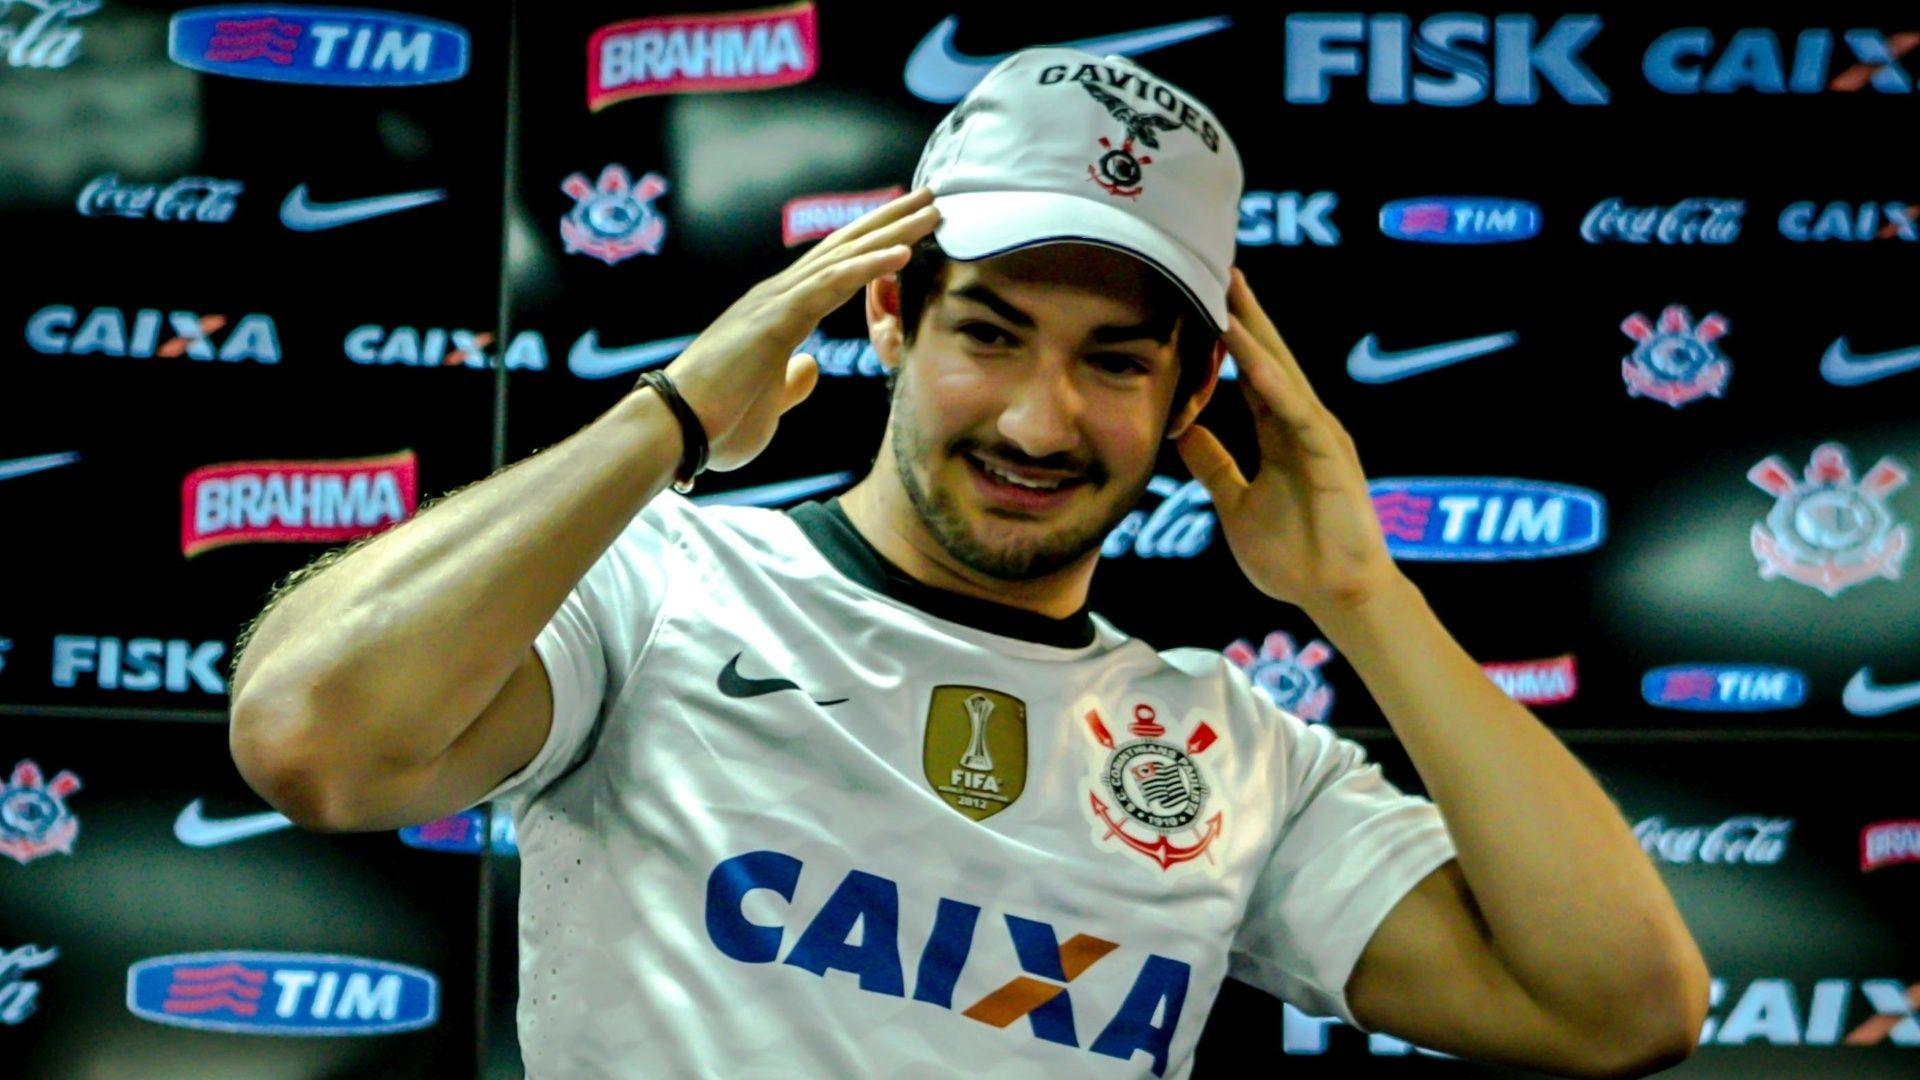 Corinthians Alexandre Pato in the cap wallpaper and image